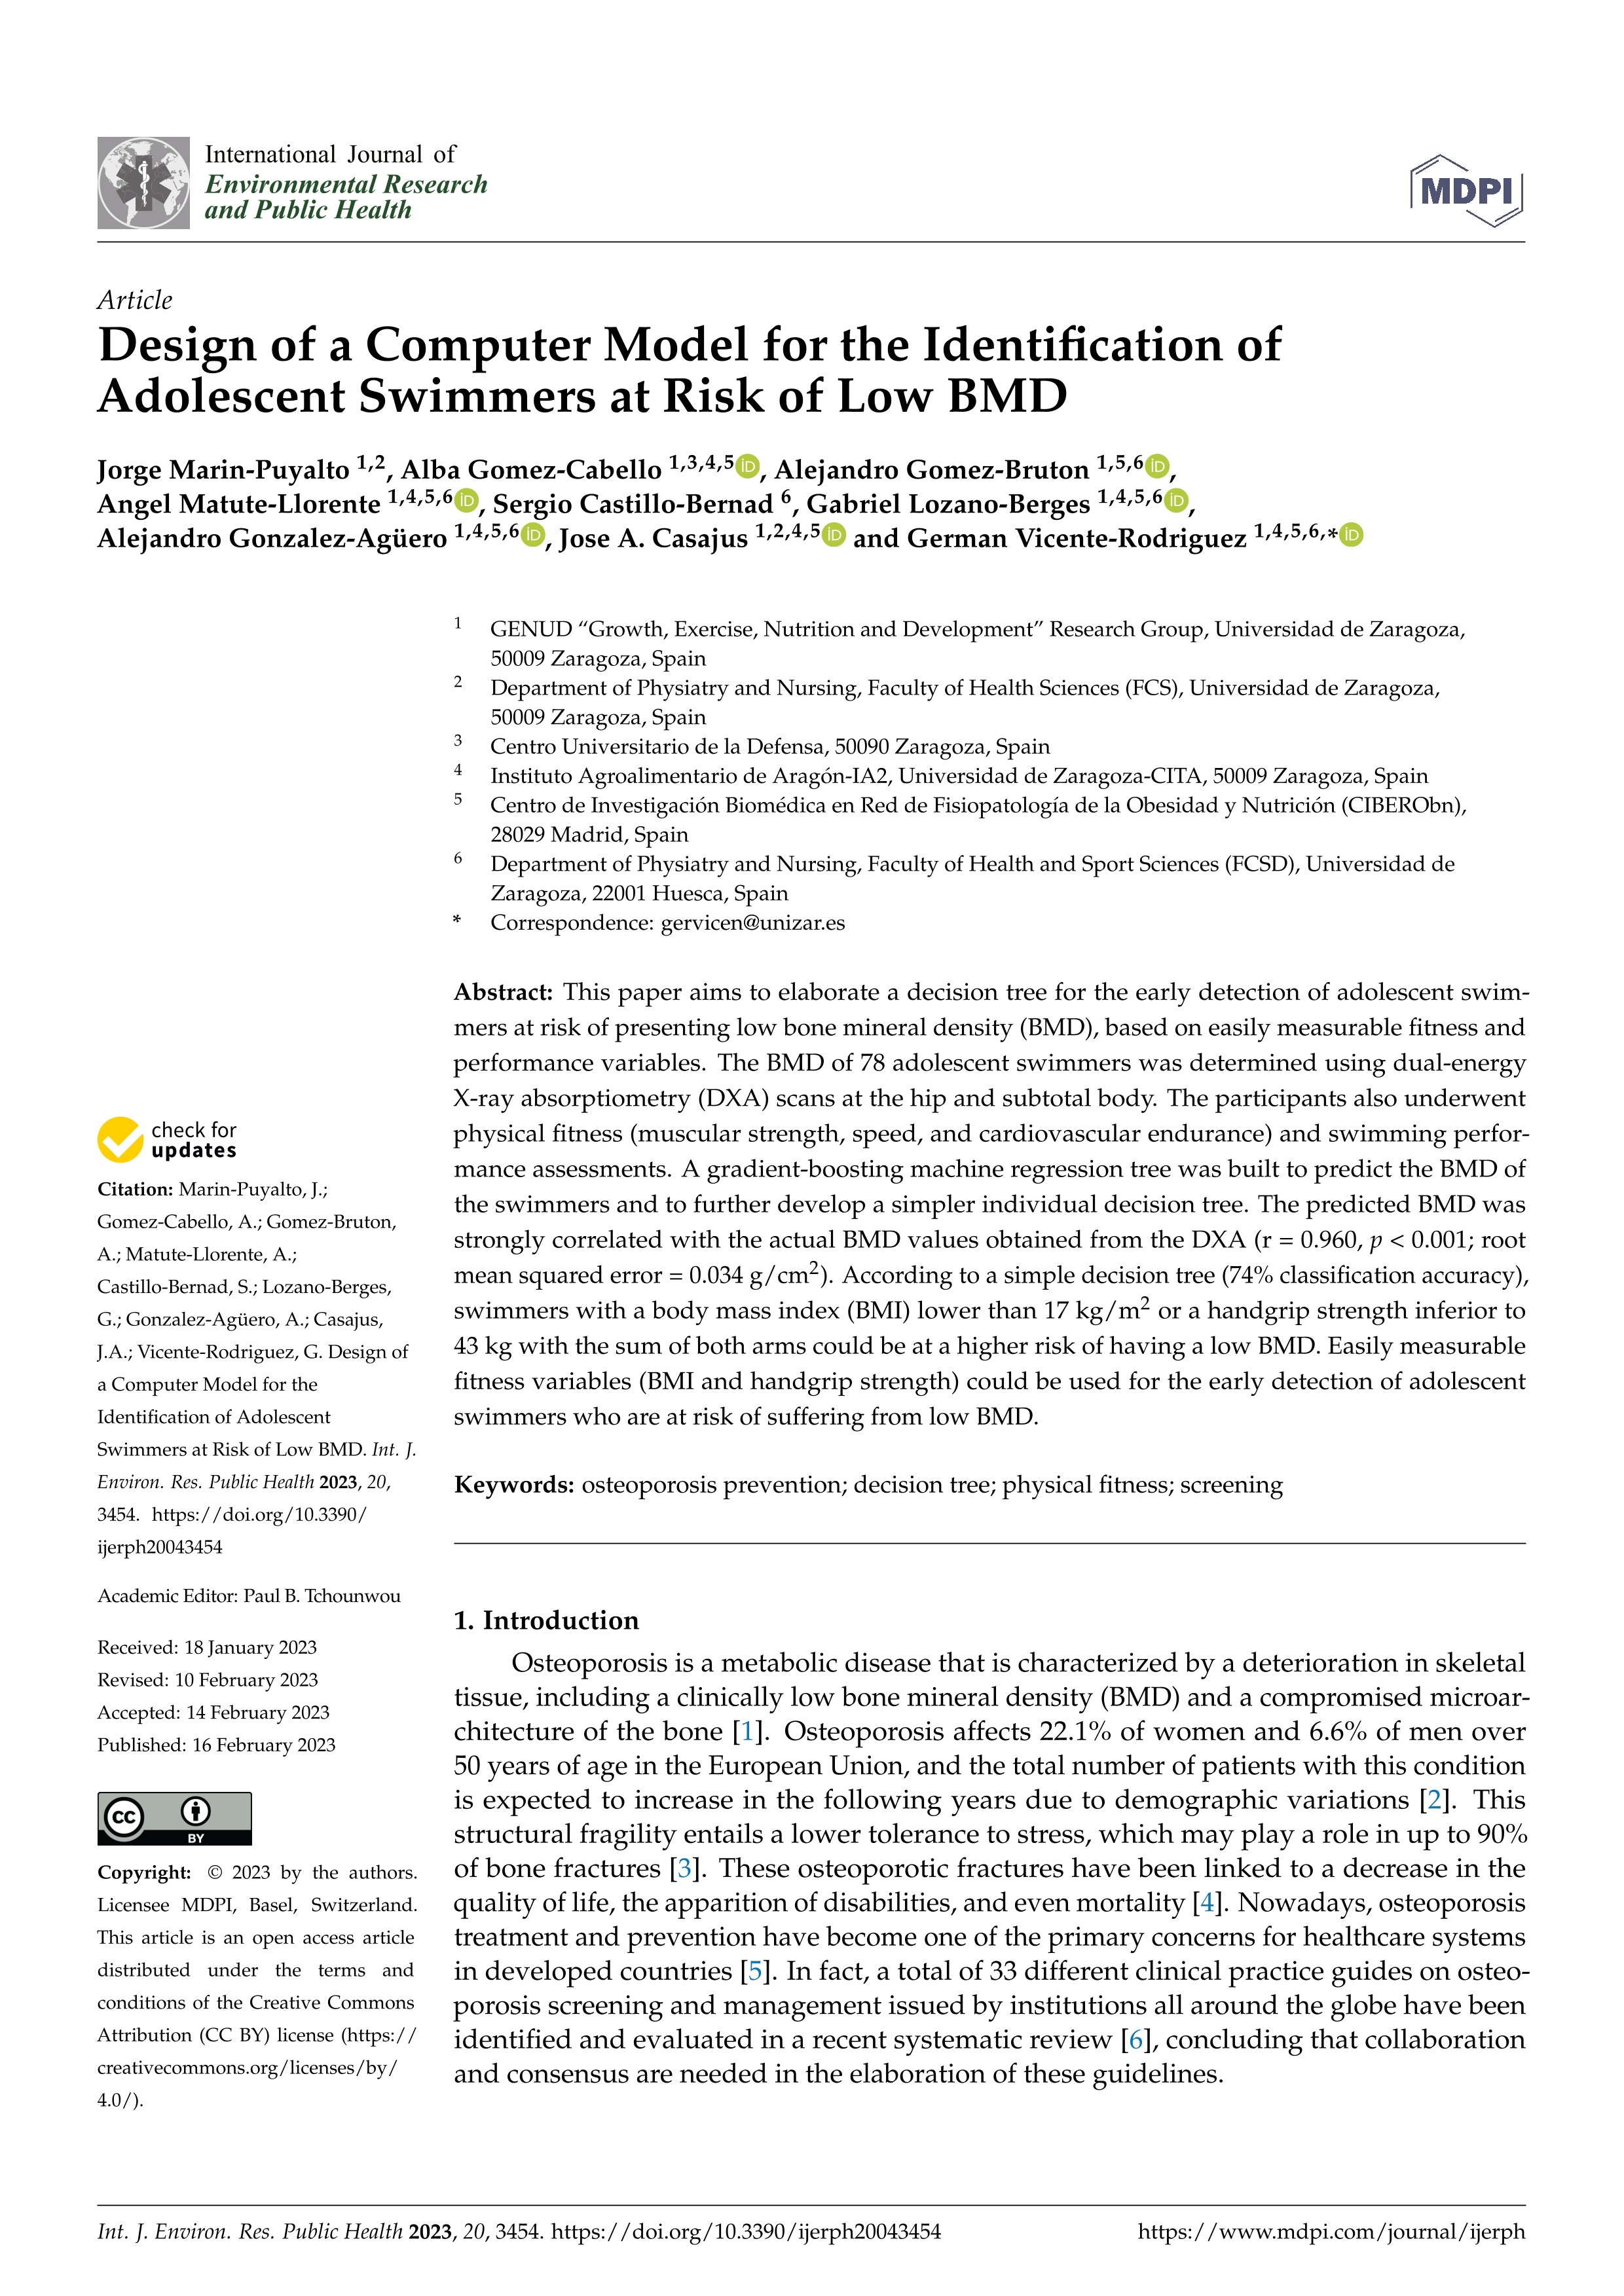 Design of a computer model for the identification of adolescent swimmers at risk of low BMD